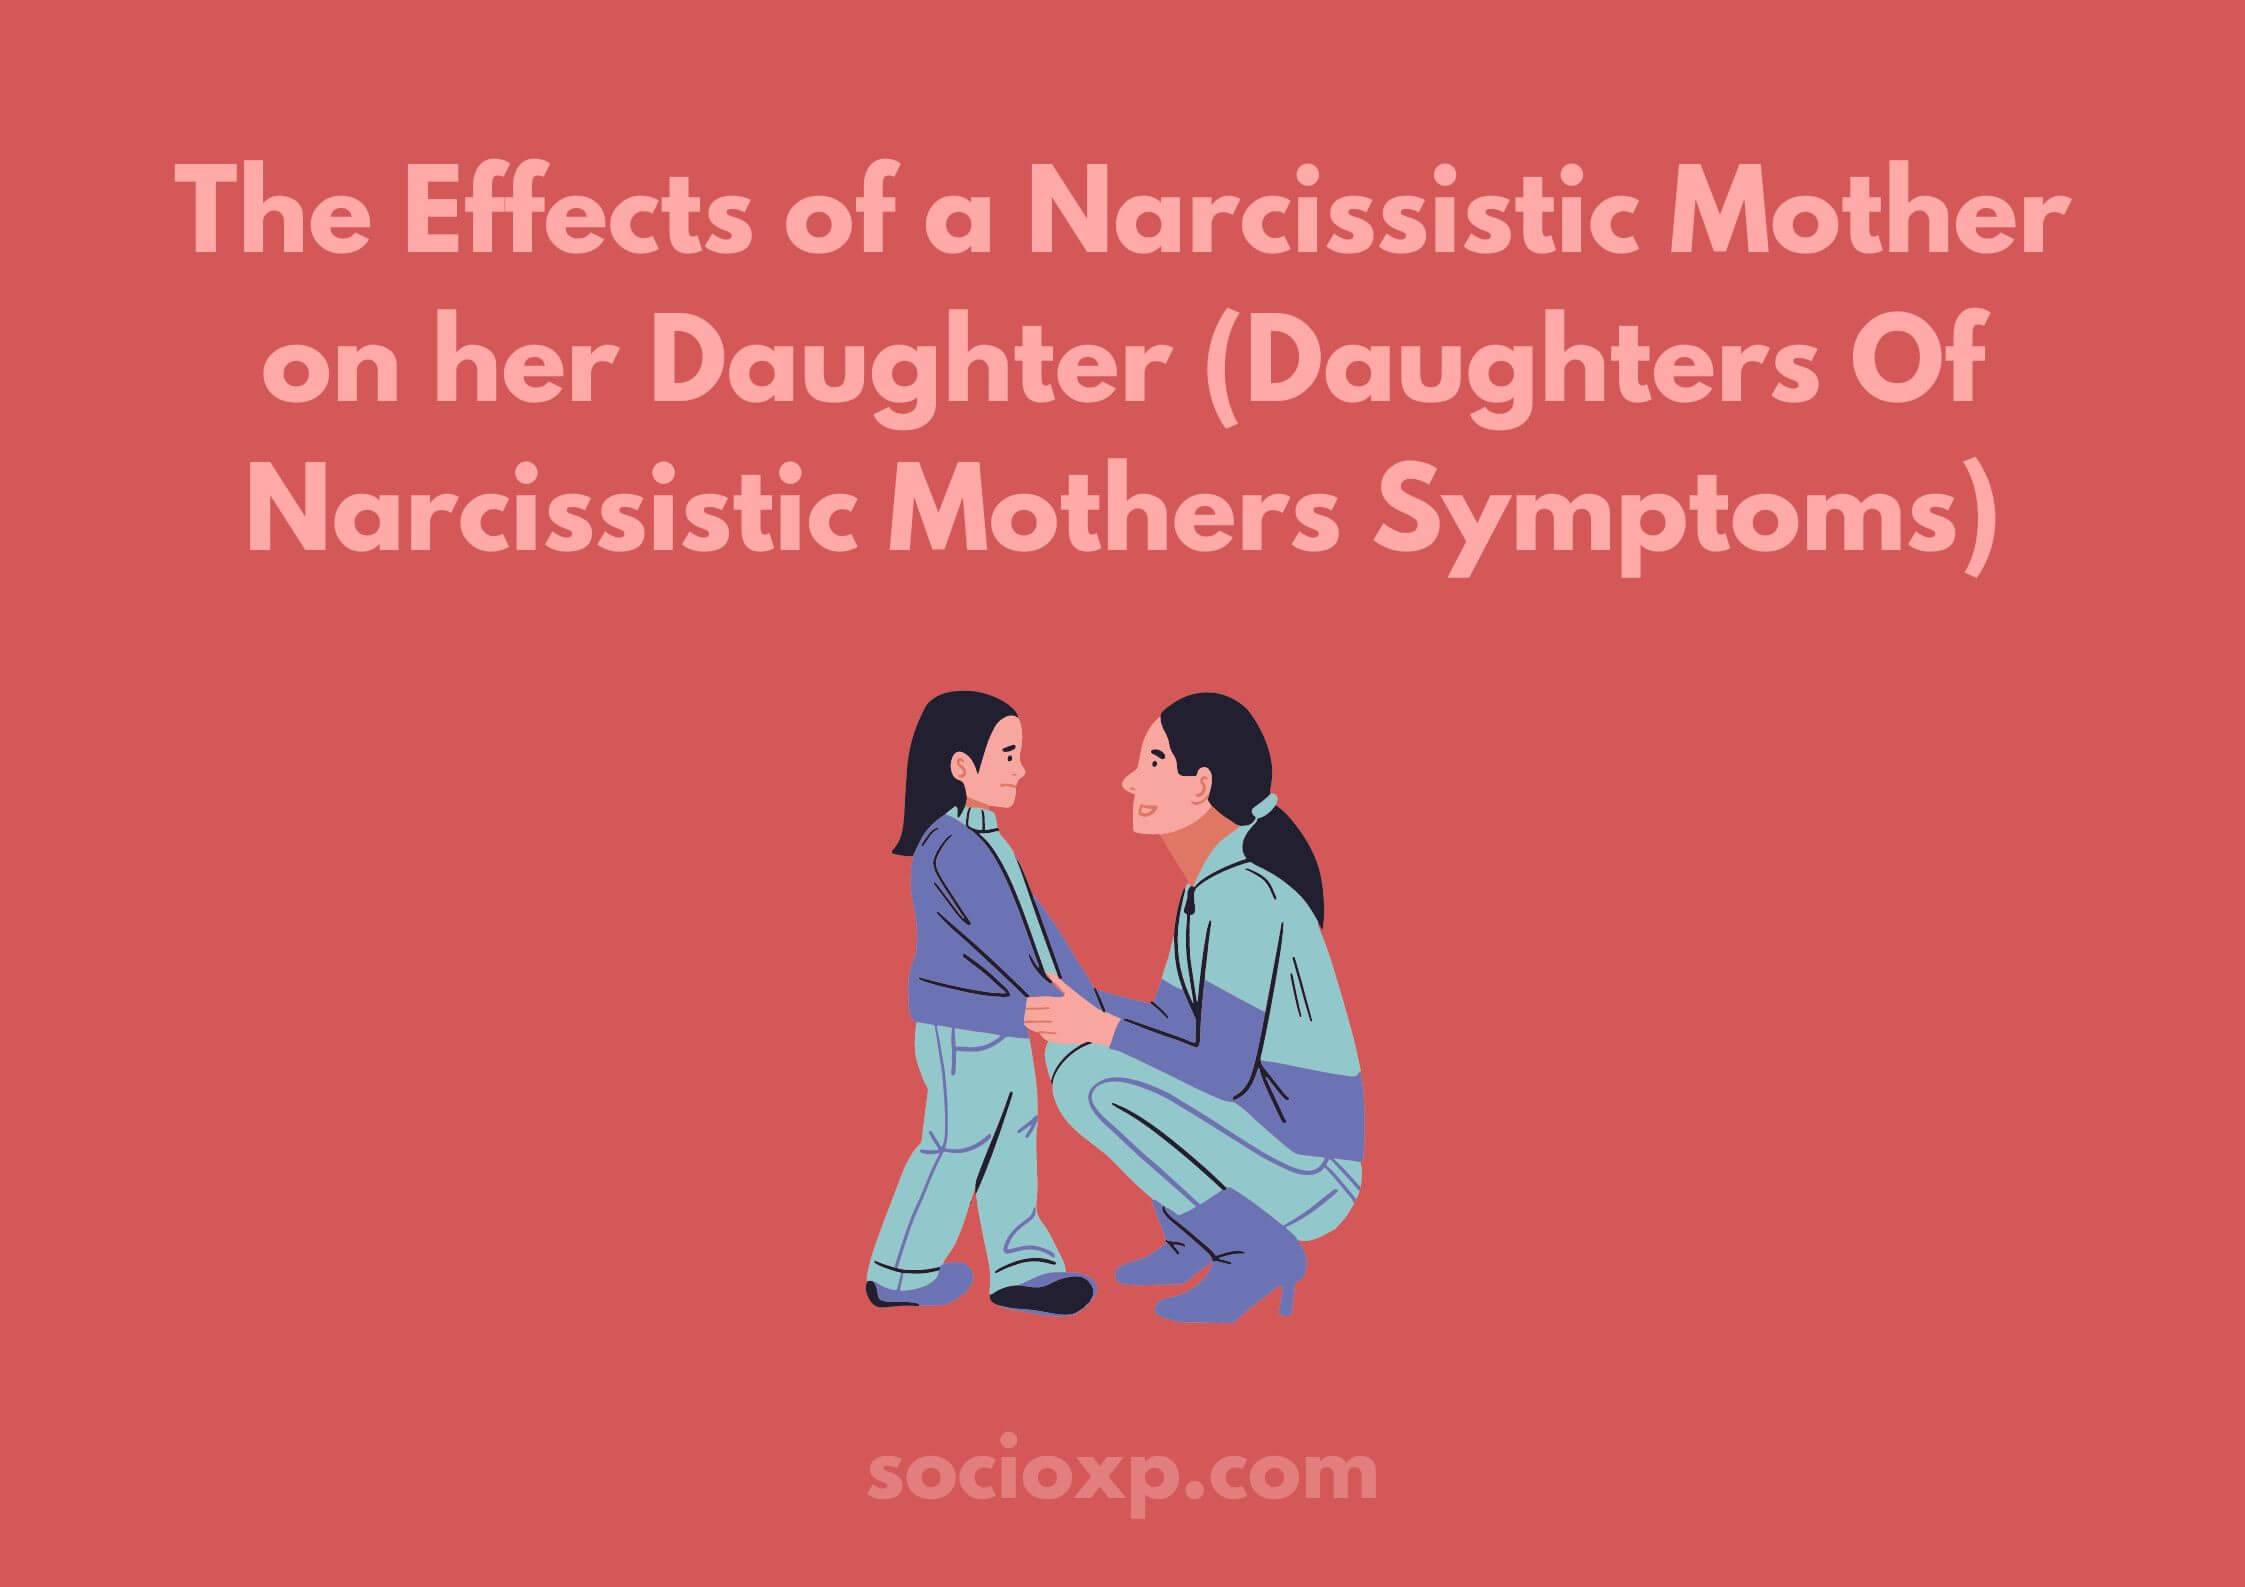 The Effects of a Narcissistic Mother on her Daughter (Daughters Of Narcissistic Mothers Symptoms)